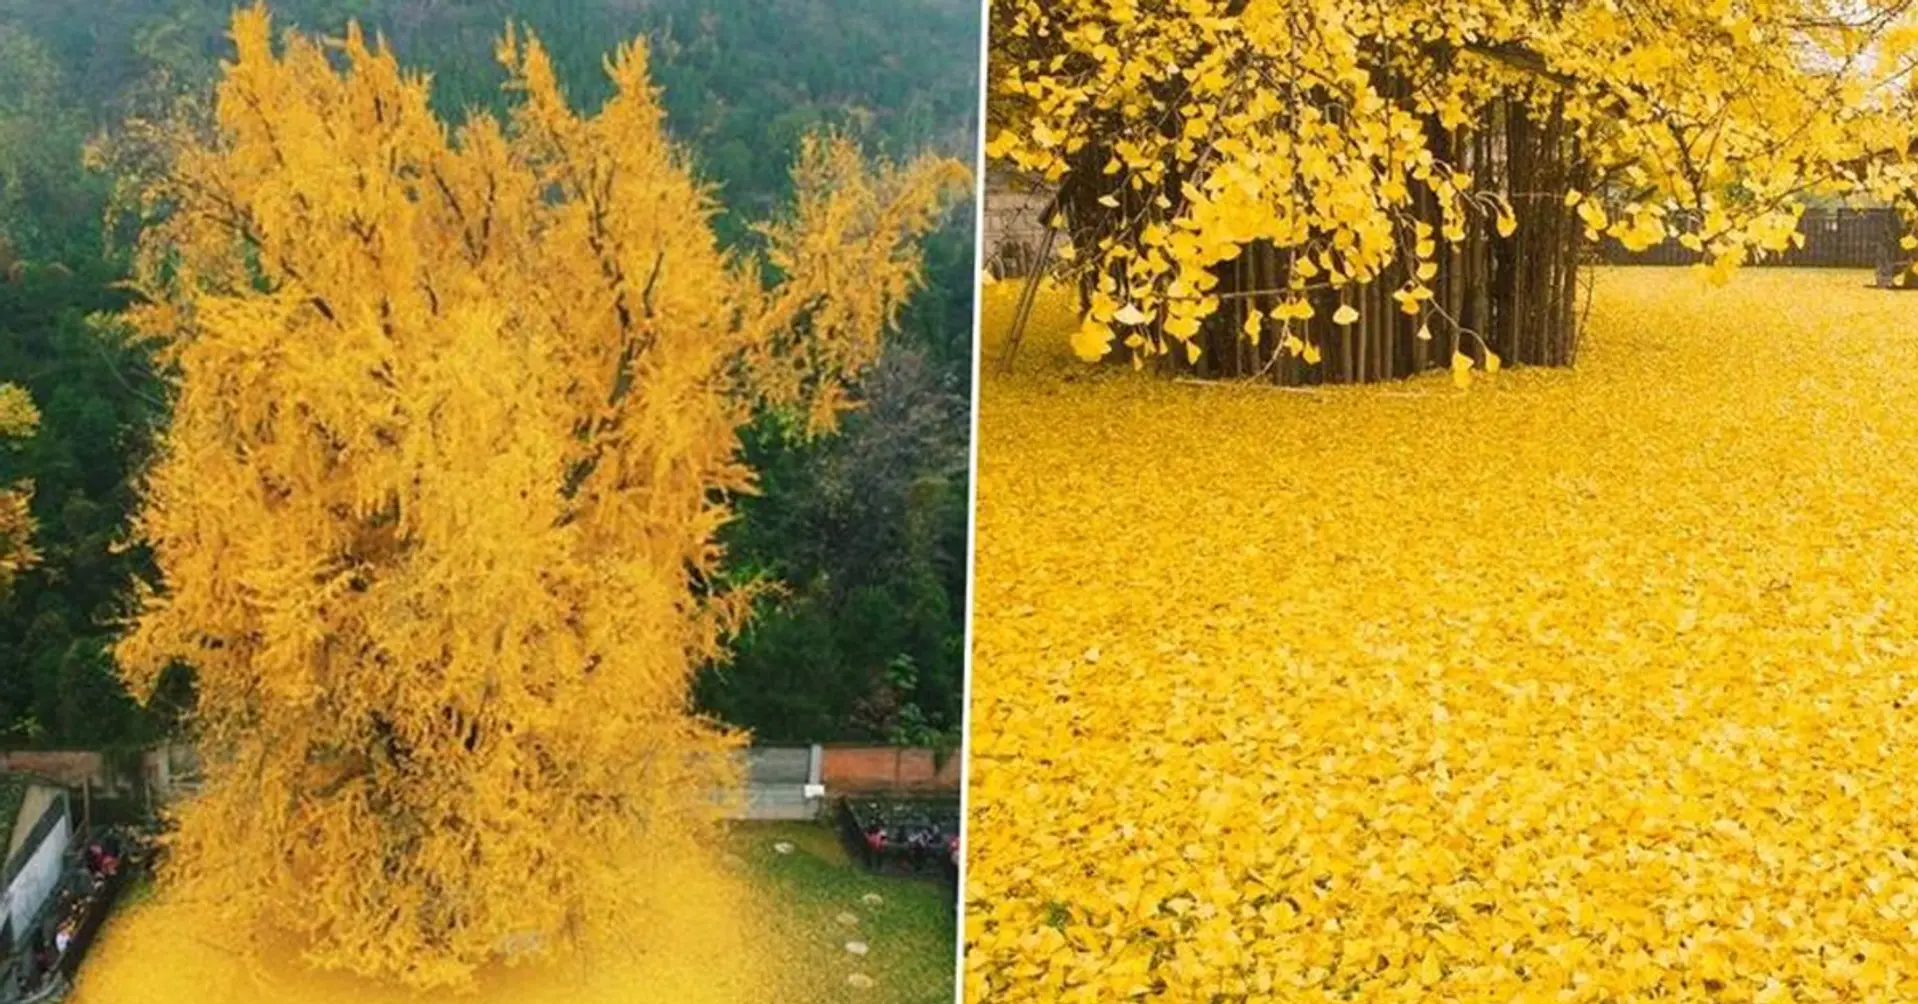 Out of this world: Incredible 1400-year-old Ginkgo Tree goes viral after series of photos emerge